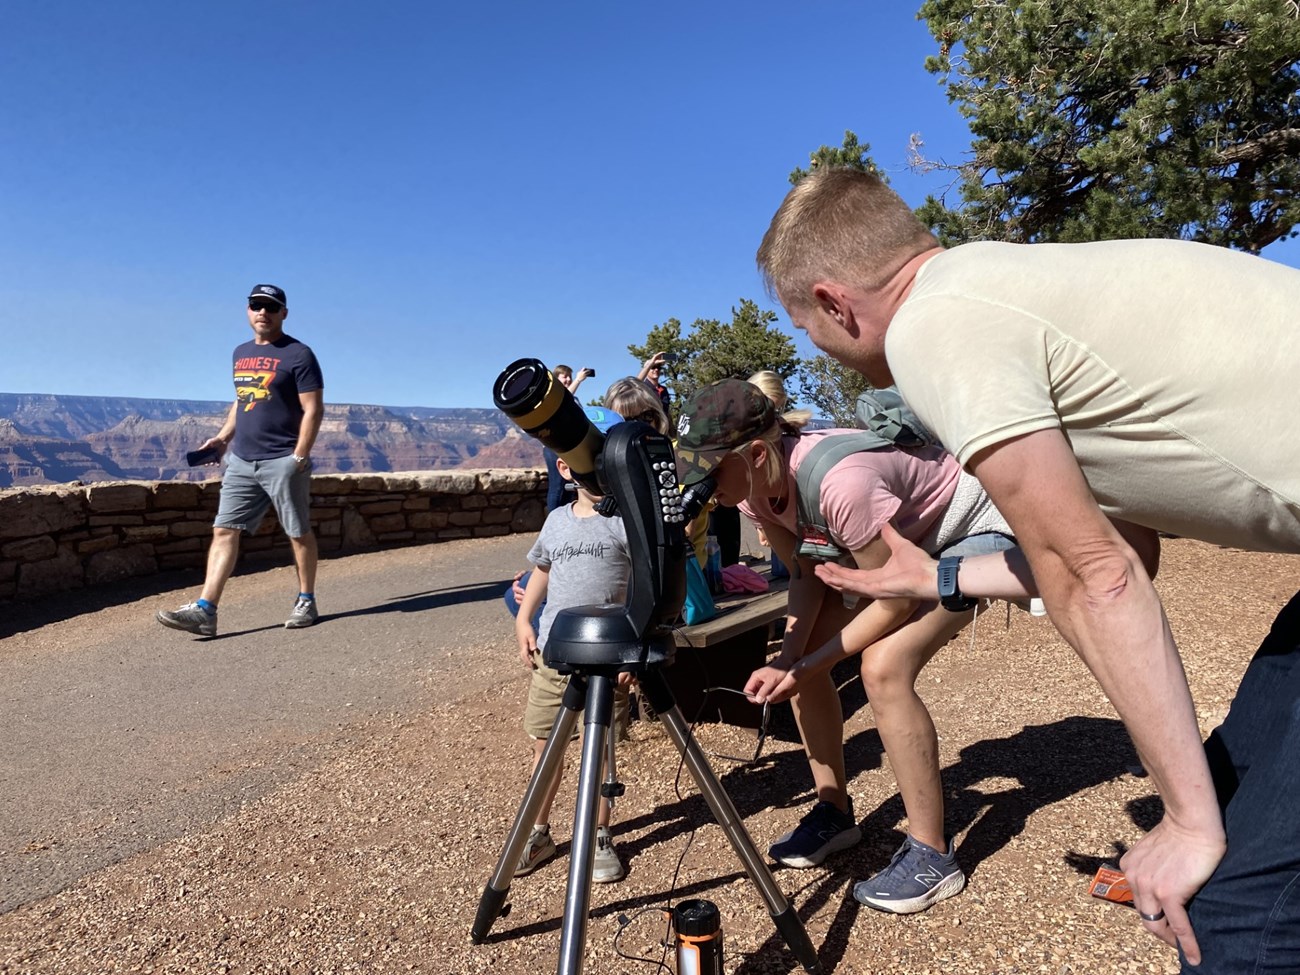 A man with red hair and a yellow shirt stands over a small telescope during the day while a family looks through it.